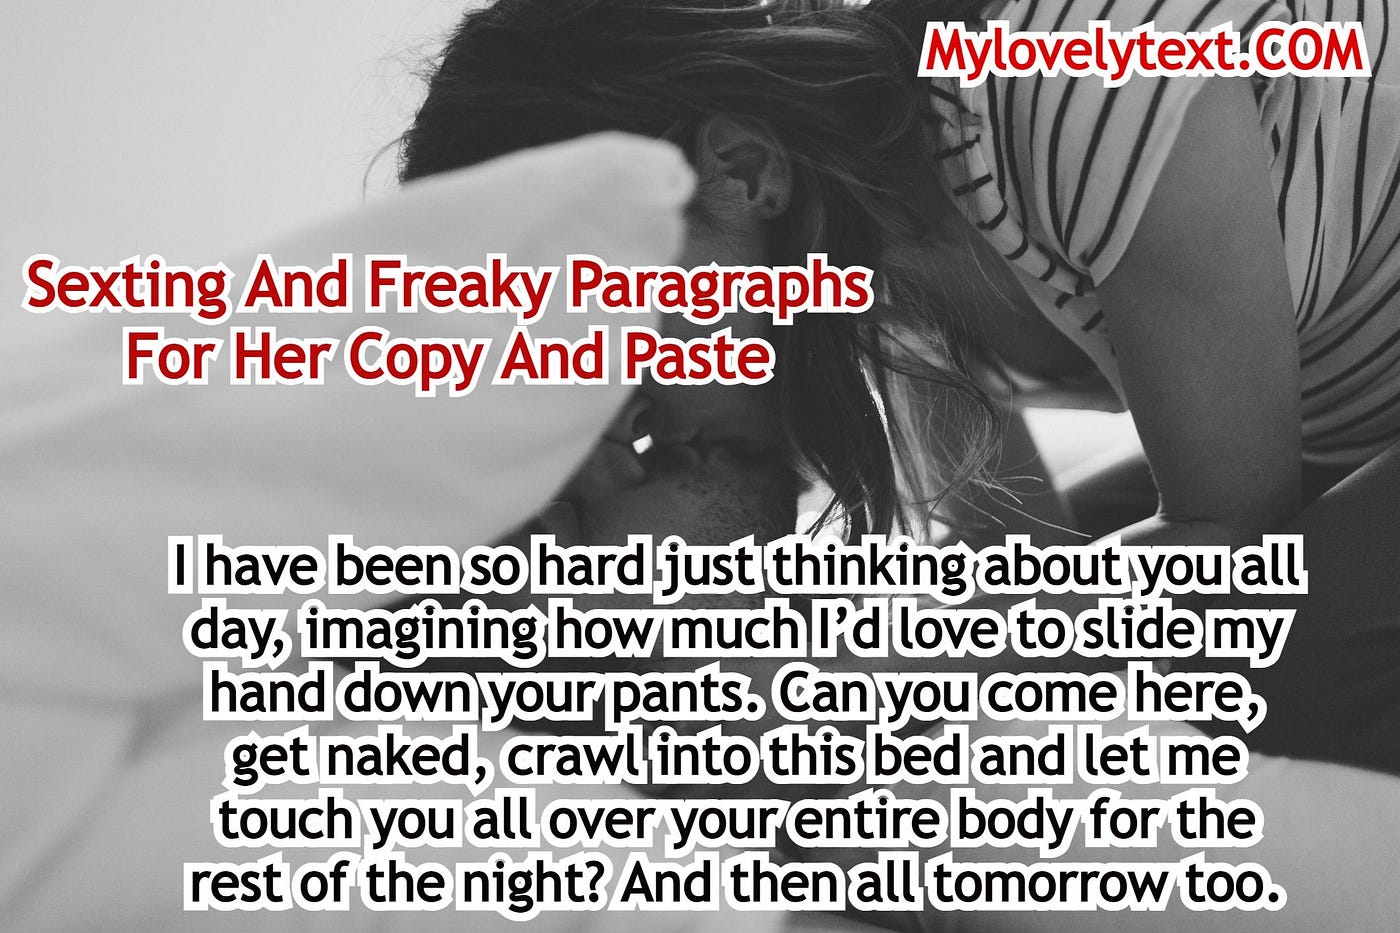 Sexting And Freaky Paragraphs For Her Copy And Paste by Uredo Medium photo